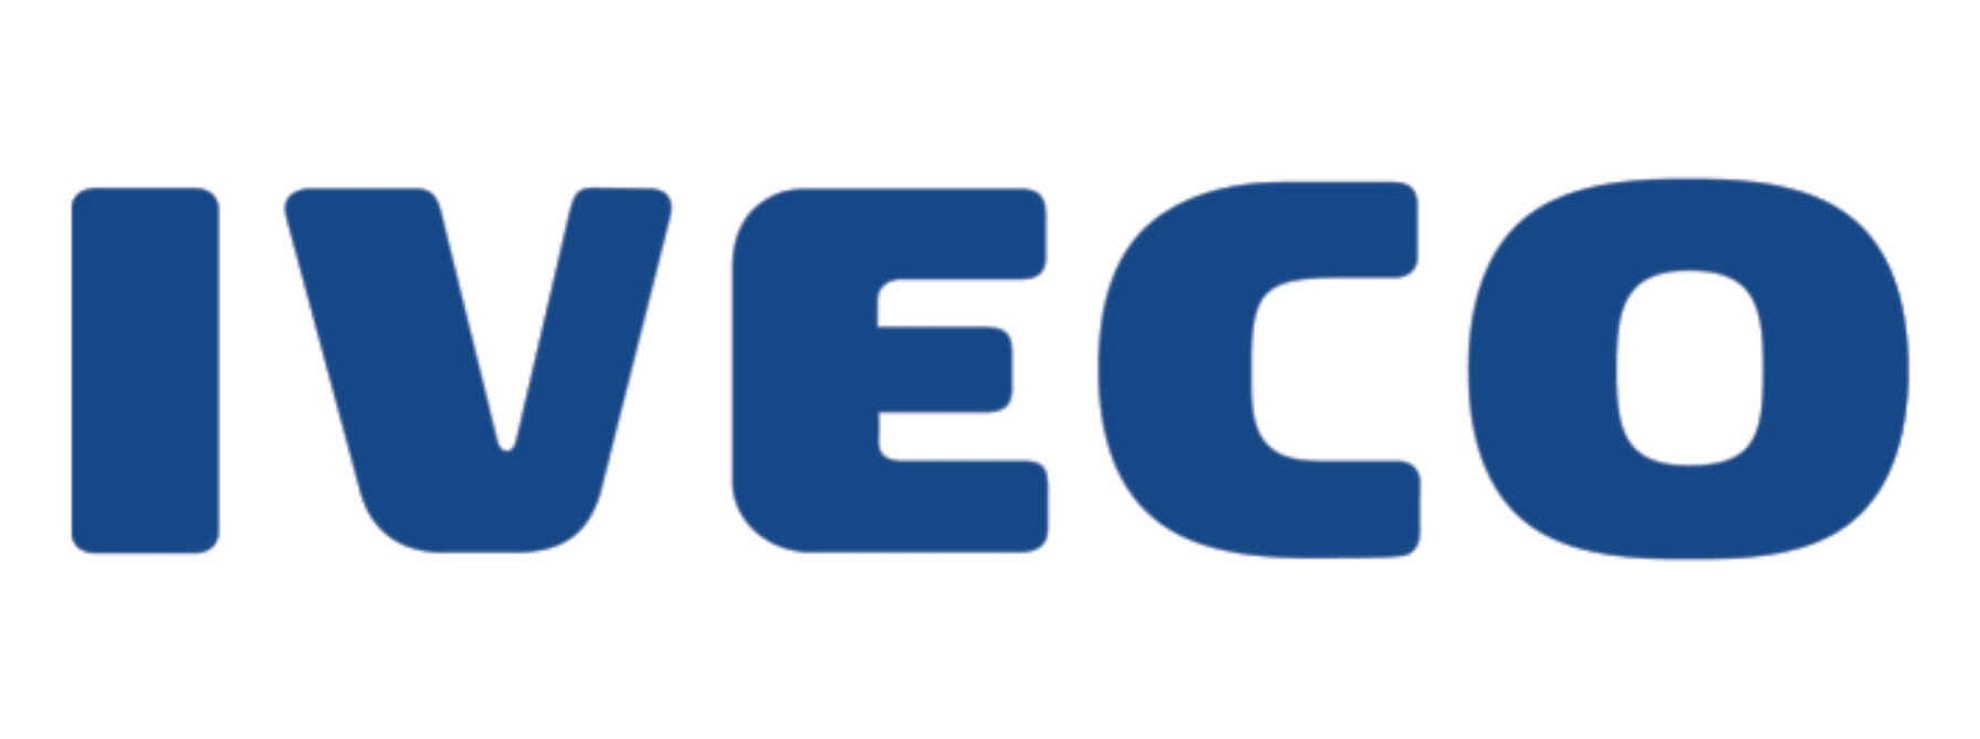 Iveco to launch three new models at 2013 JHB international motor show